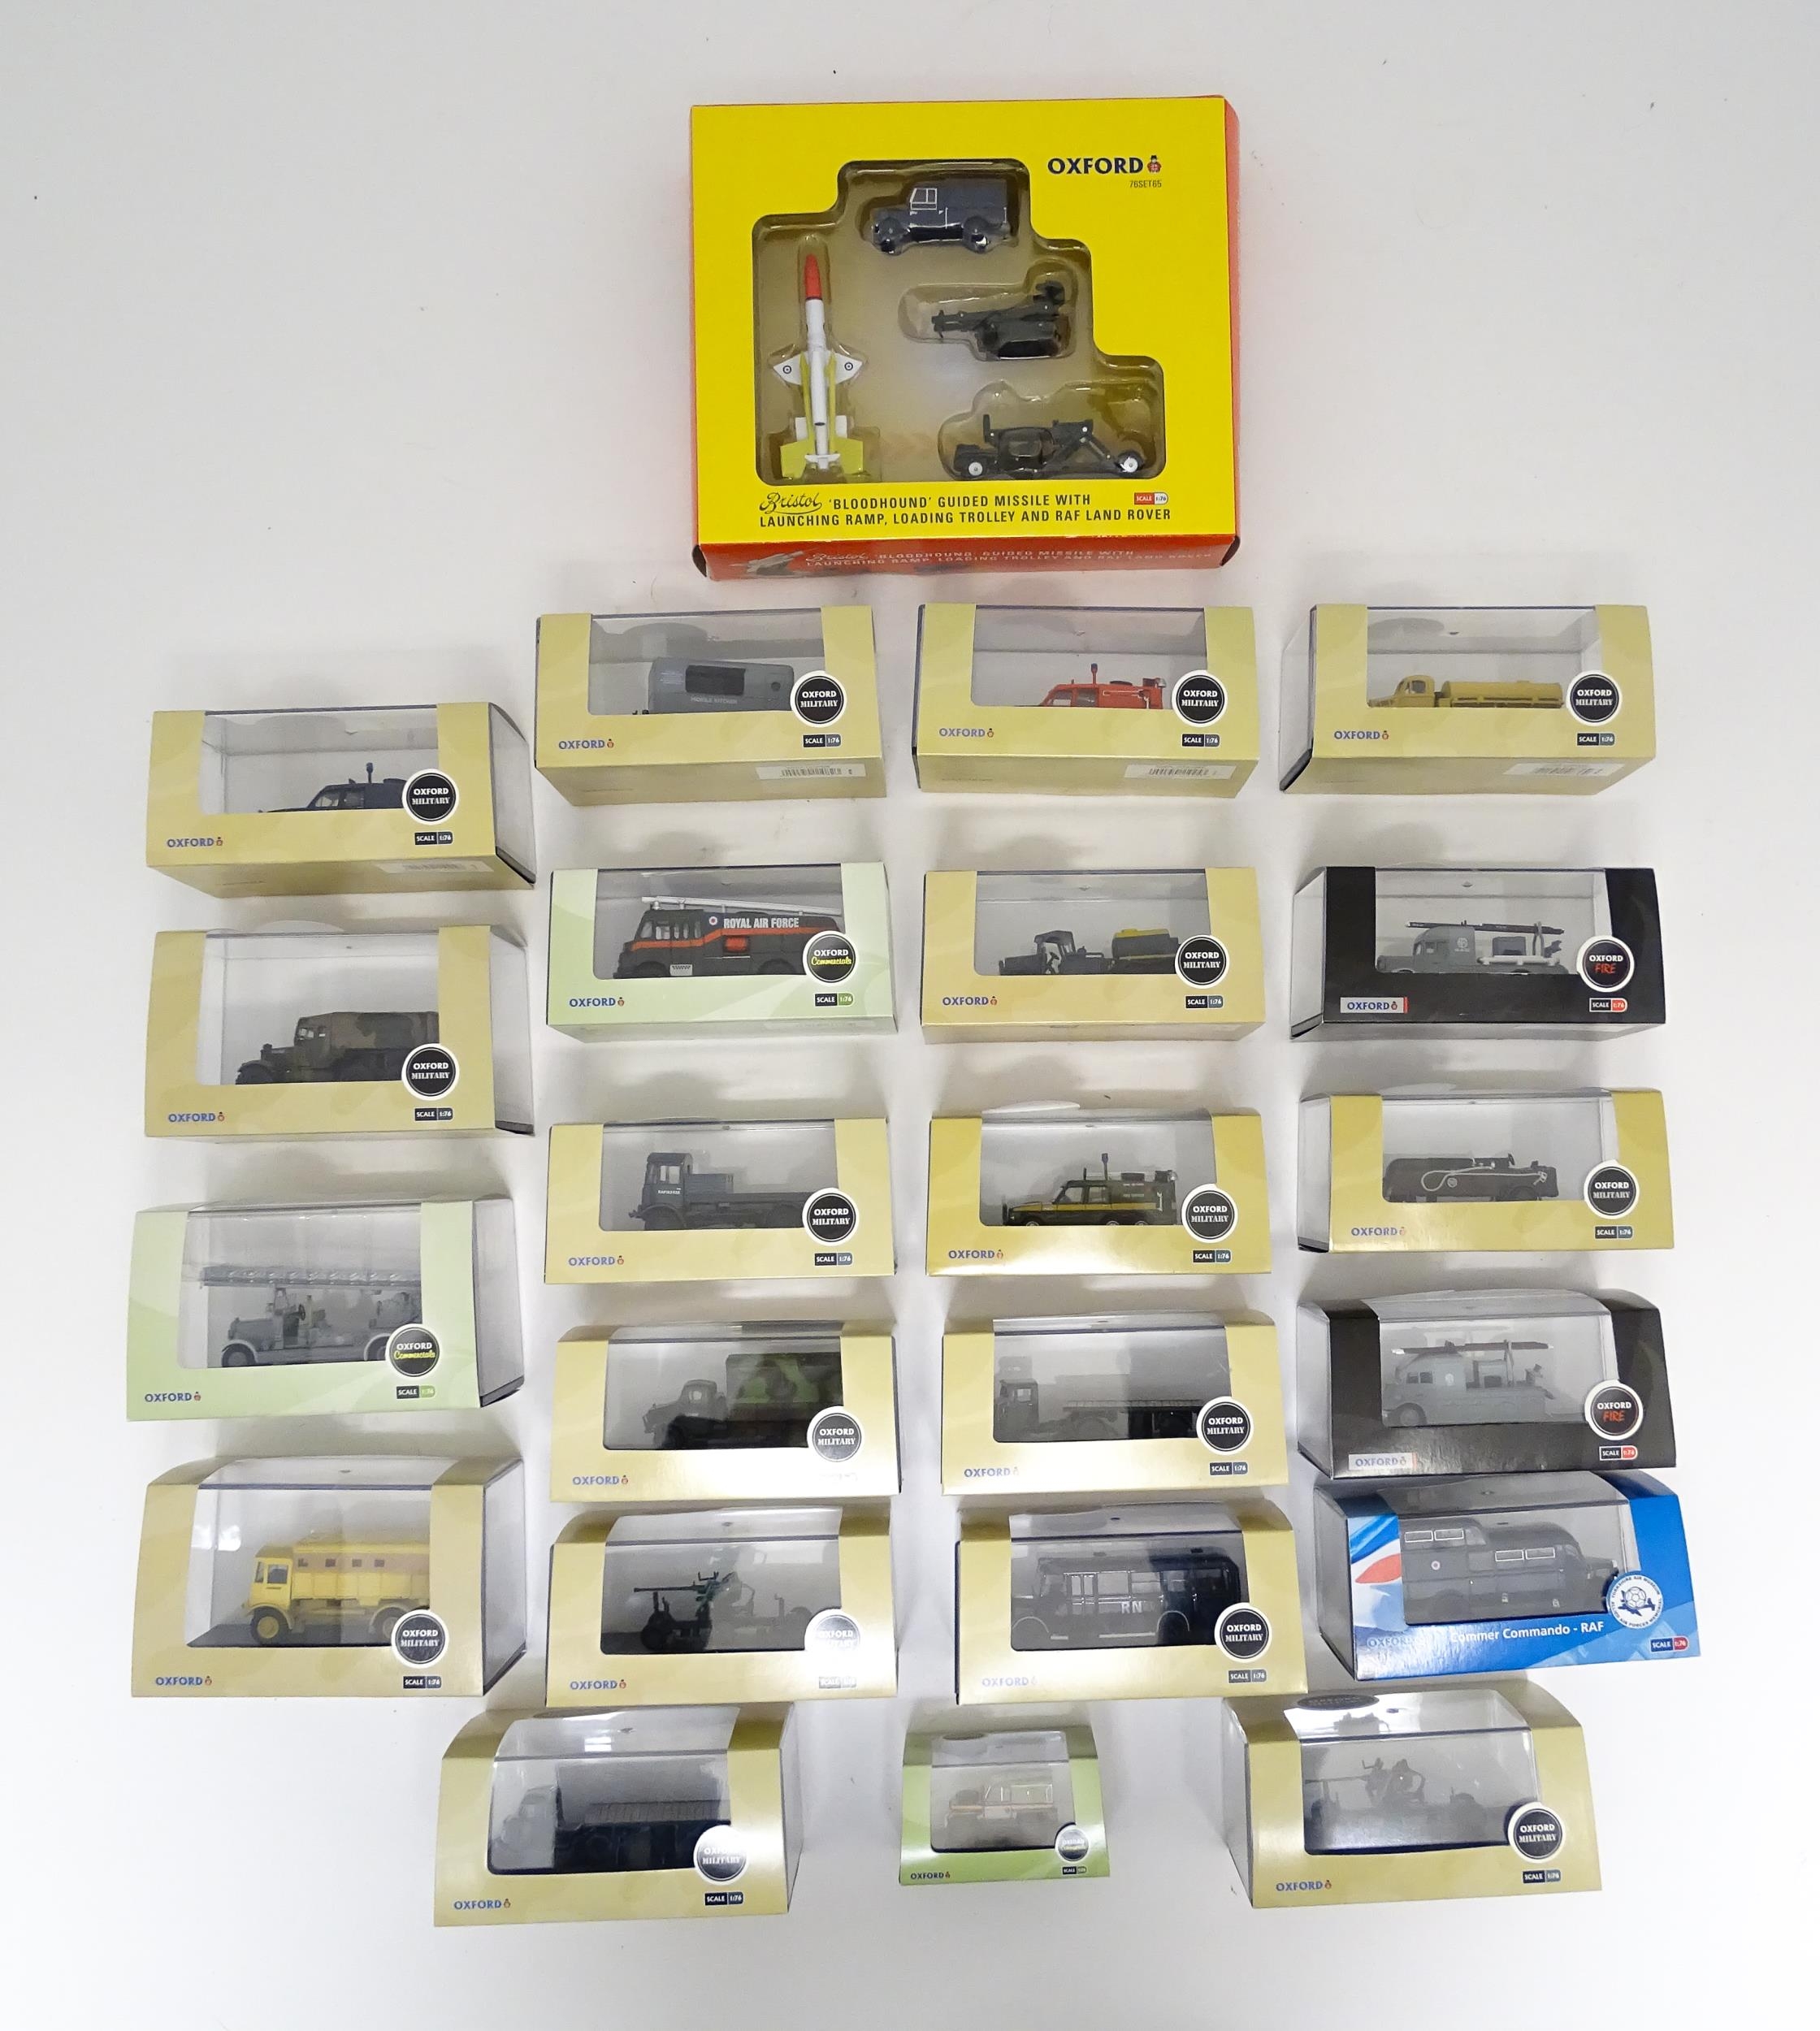 Toys: A quantity of die cast scale model Oxford Military / Fire / Commercials vehicles to include